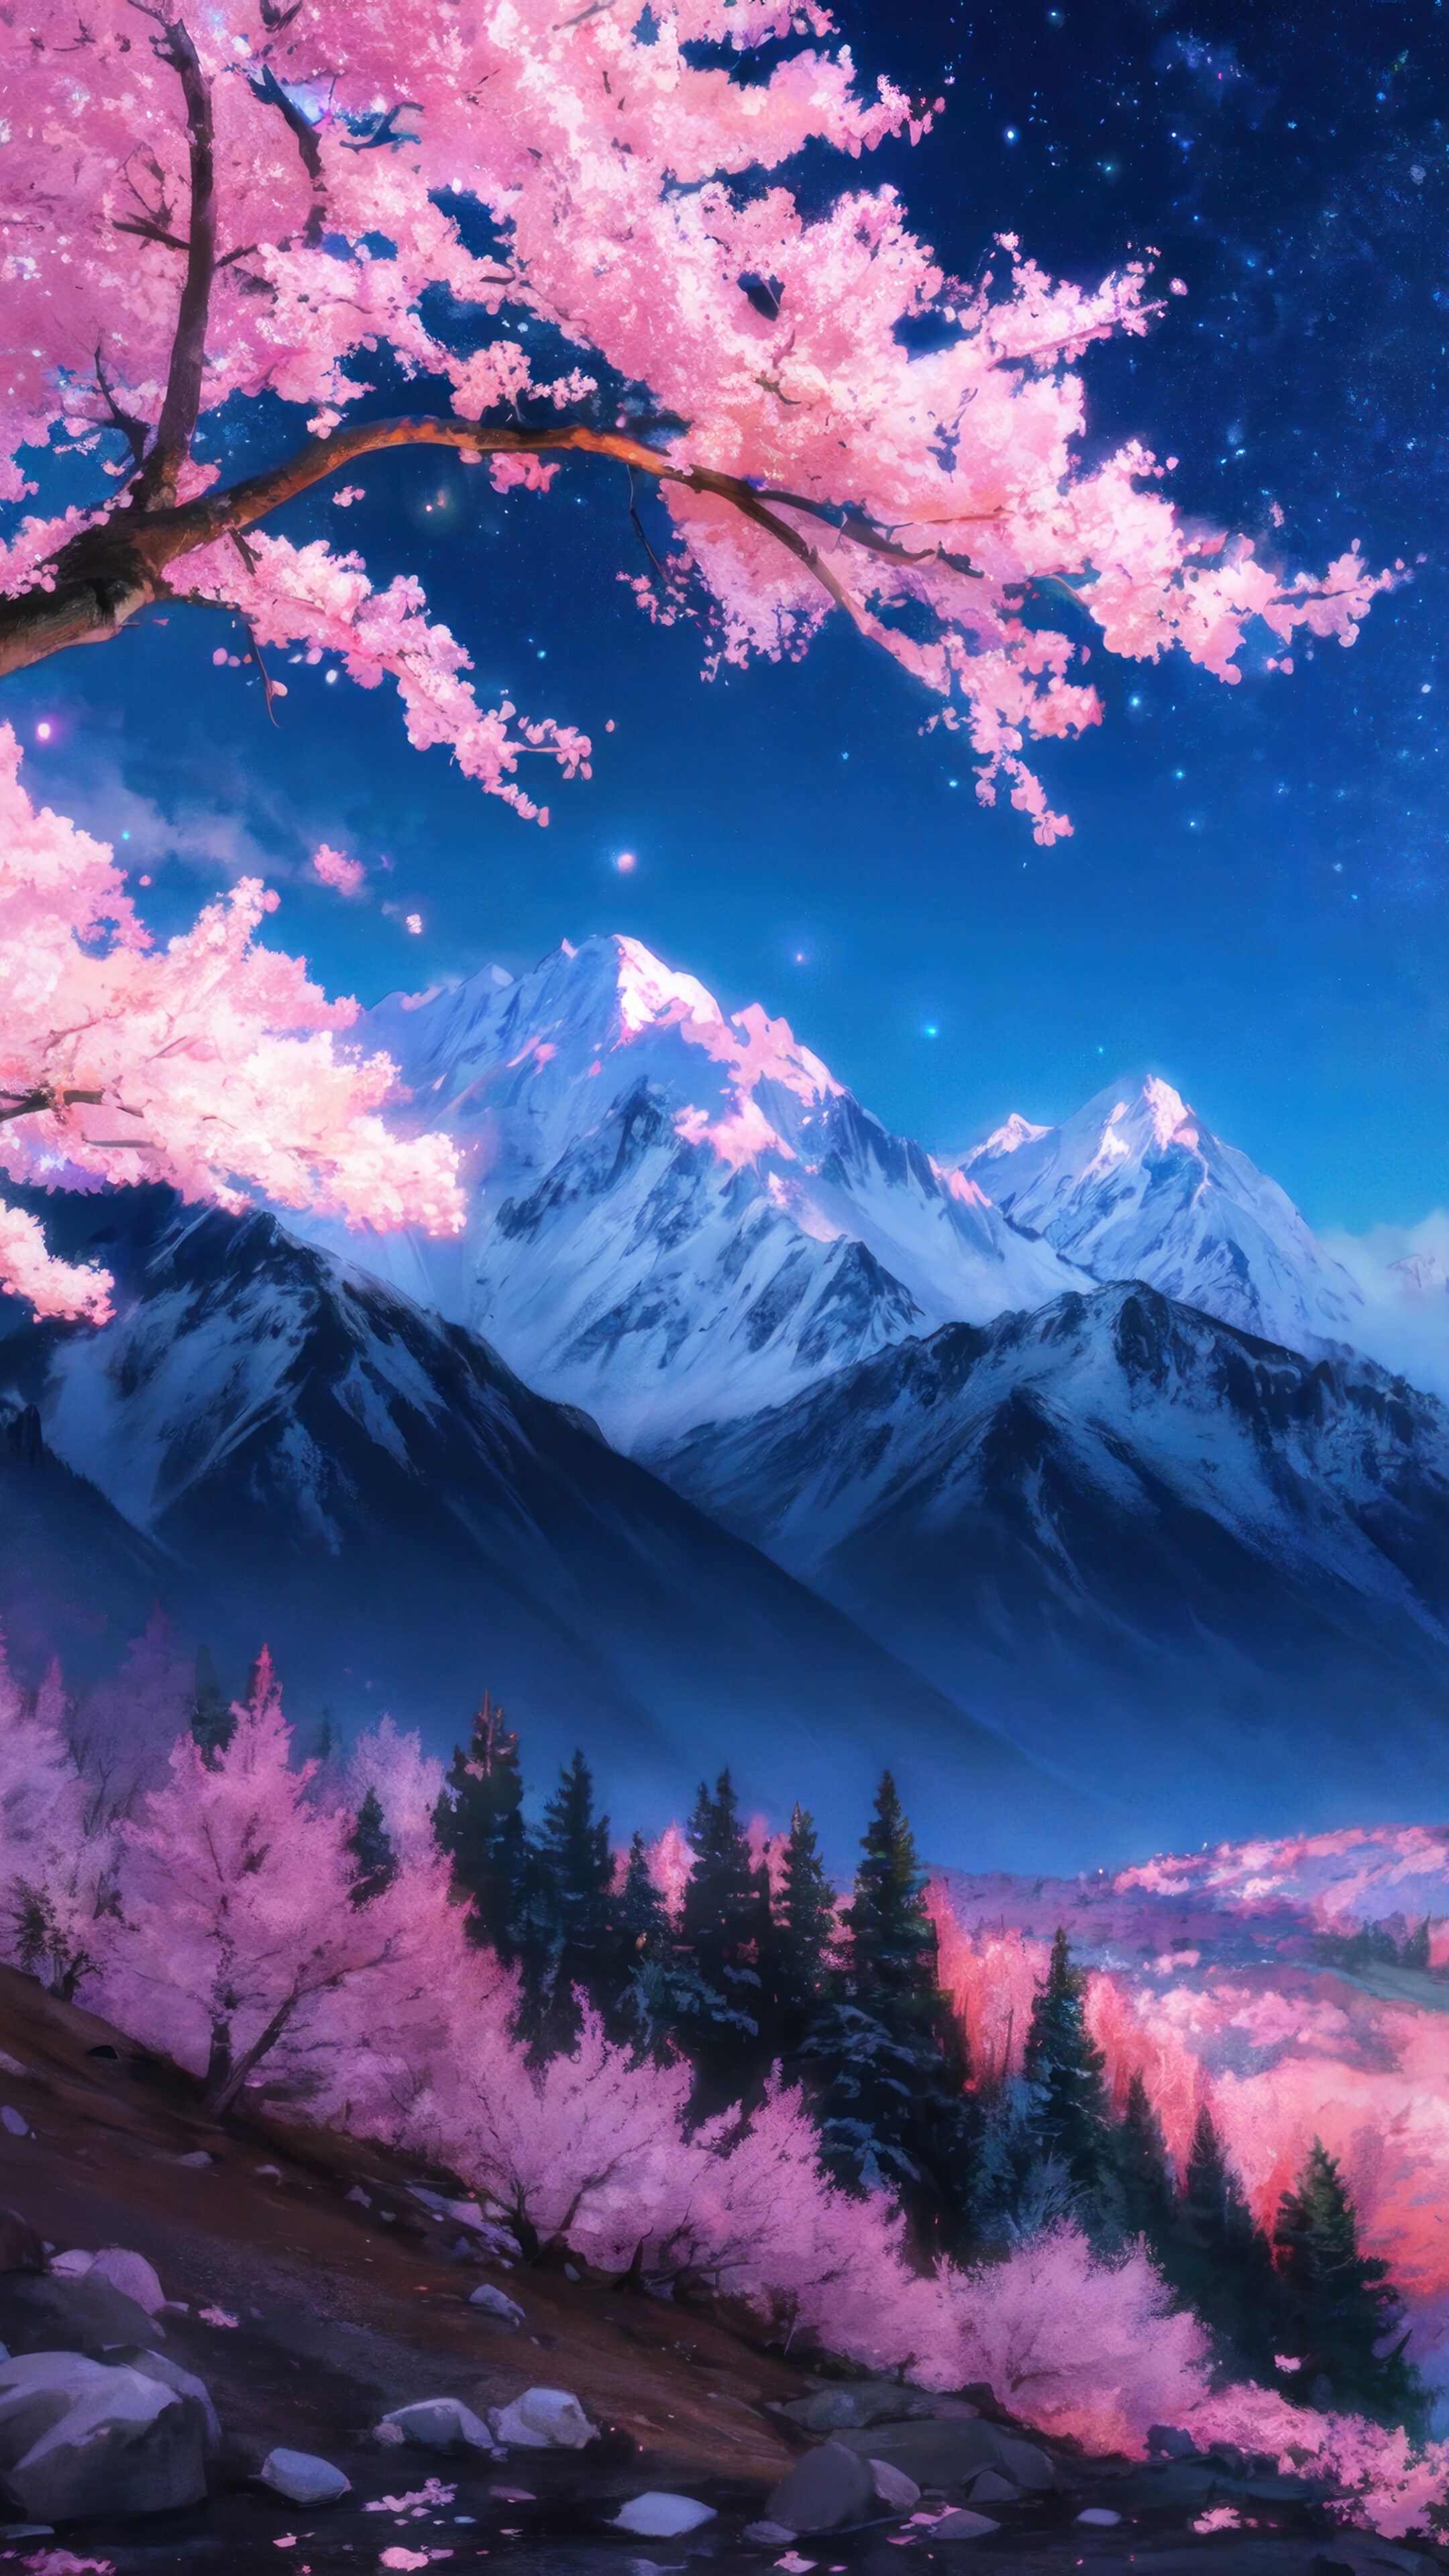 Cherry Blossom Forest Snowy Mountain Scenery Starry Night Sky 4K Android Mobile Phone